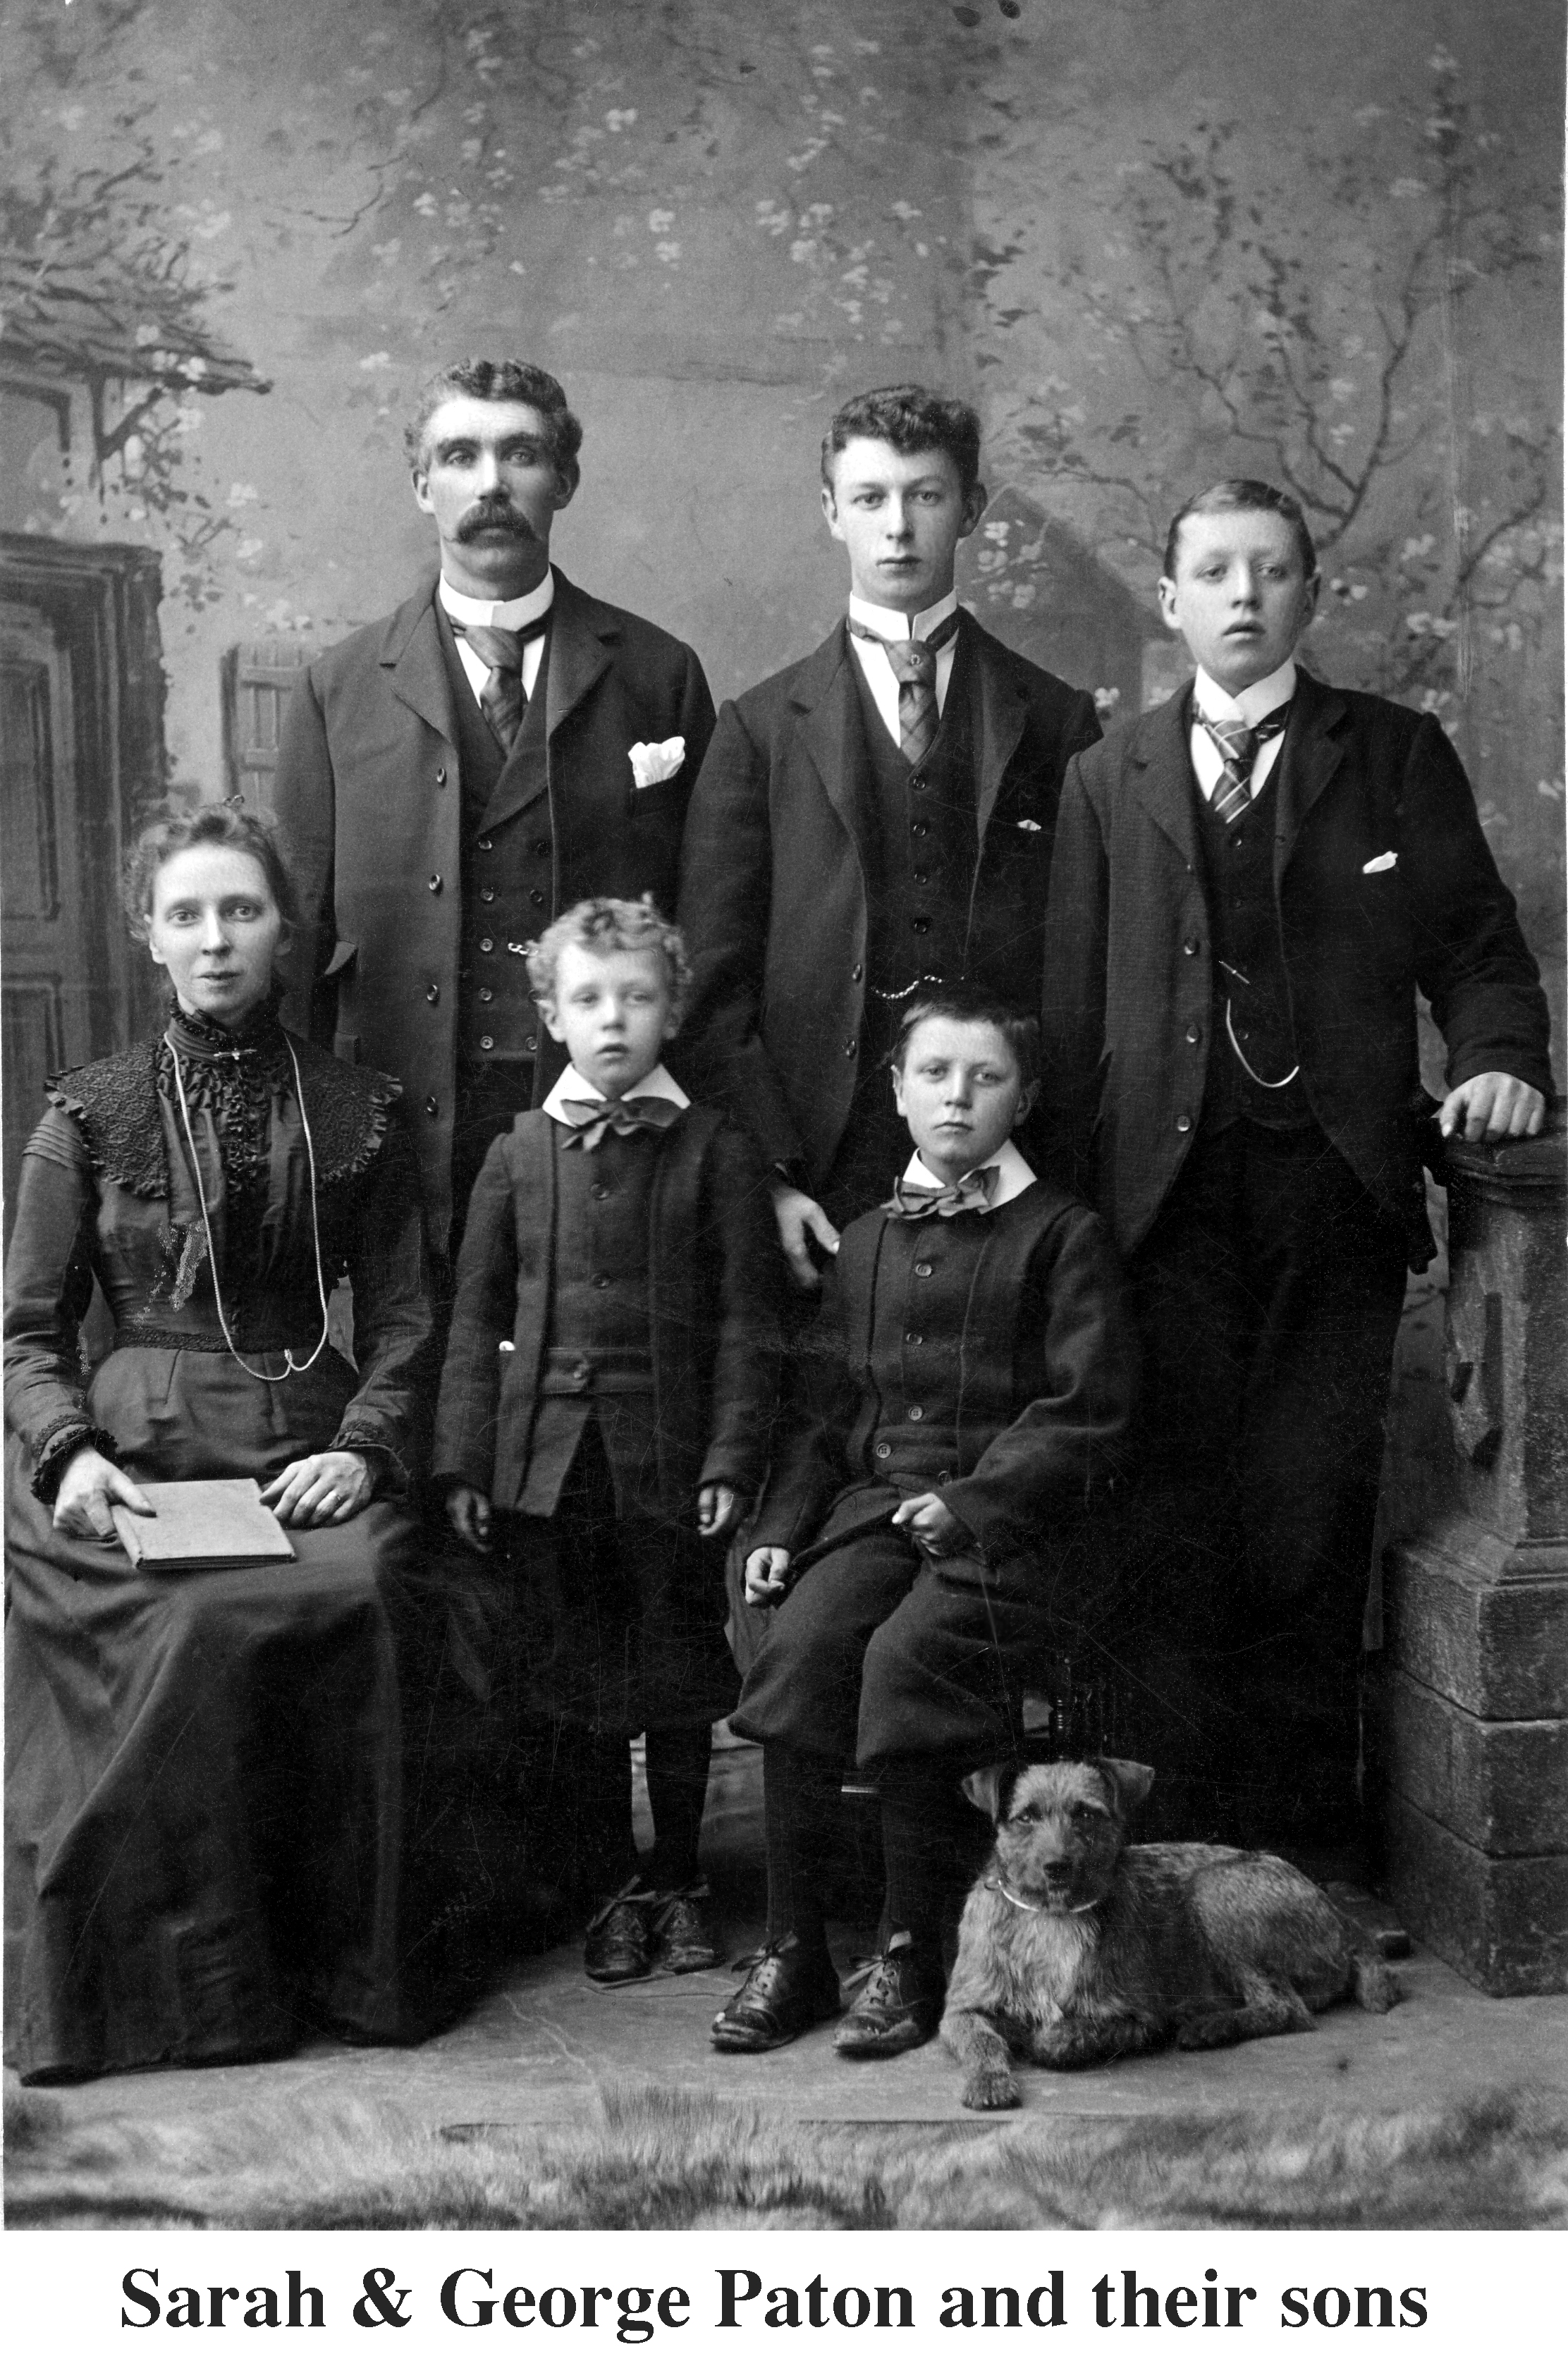 Sarah and George Paton Sr. with their sons